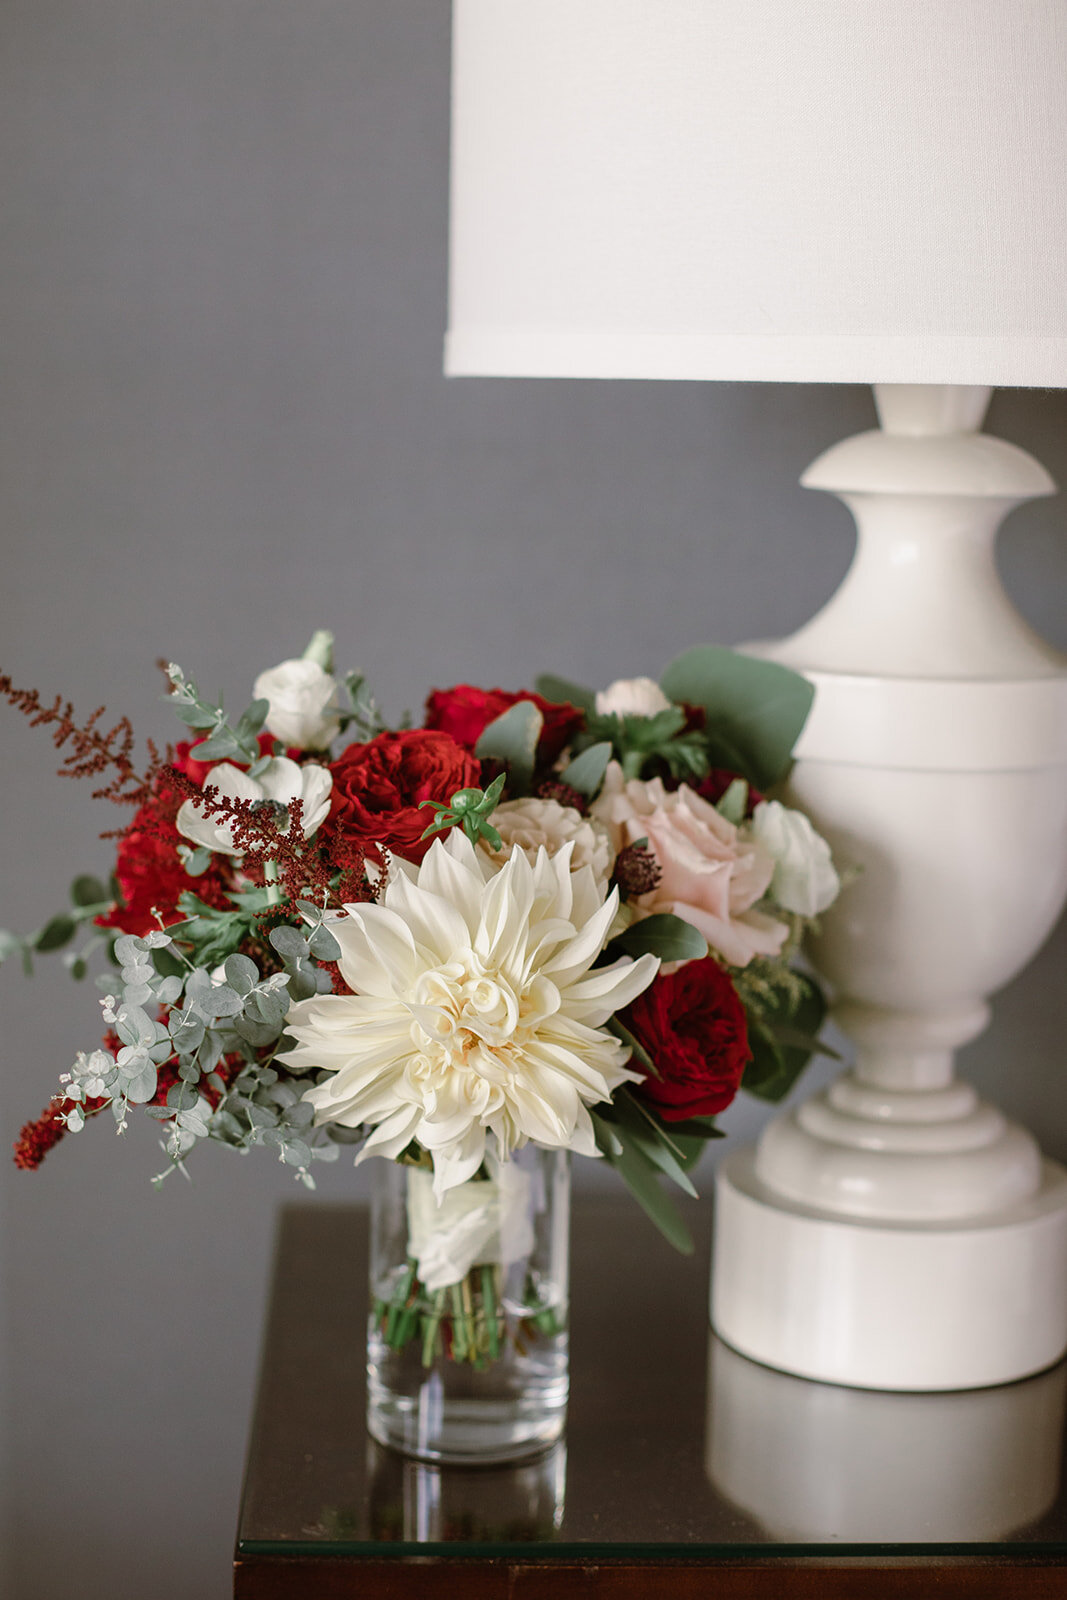 Cafe au lait dahlias and red peony wedding florals | Black tie wedding with a red tux and custom Anne Barge gown | Romantic wedding at St. Bridget and The Omni Hotel in Richmond, VA.